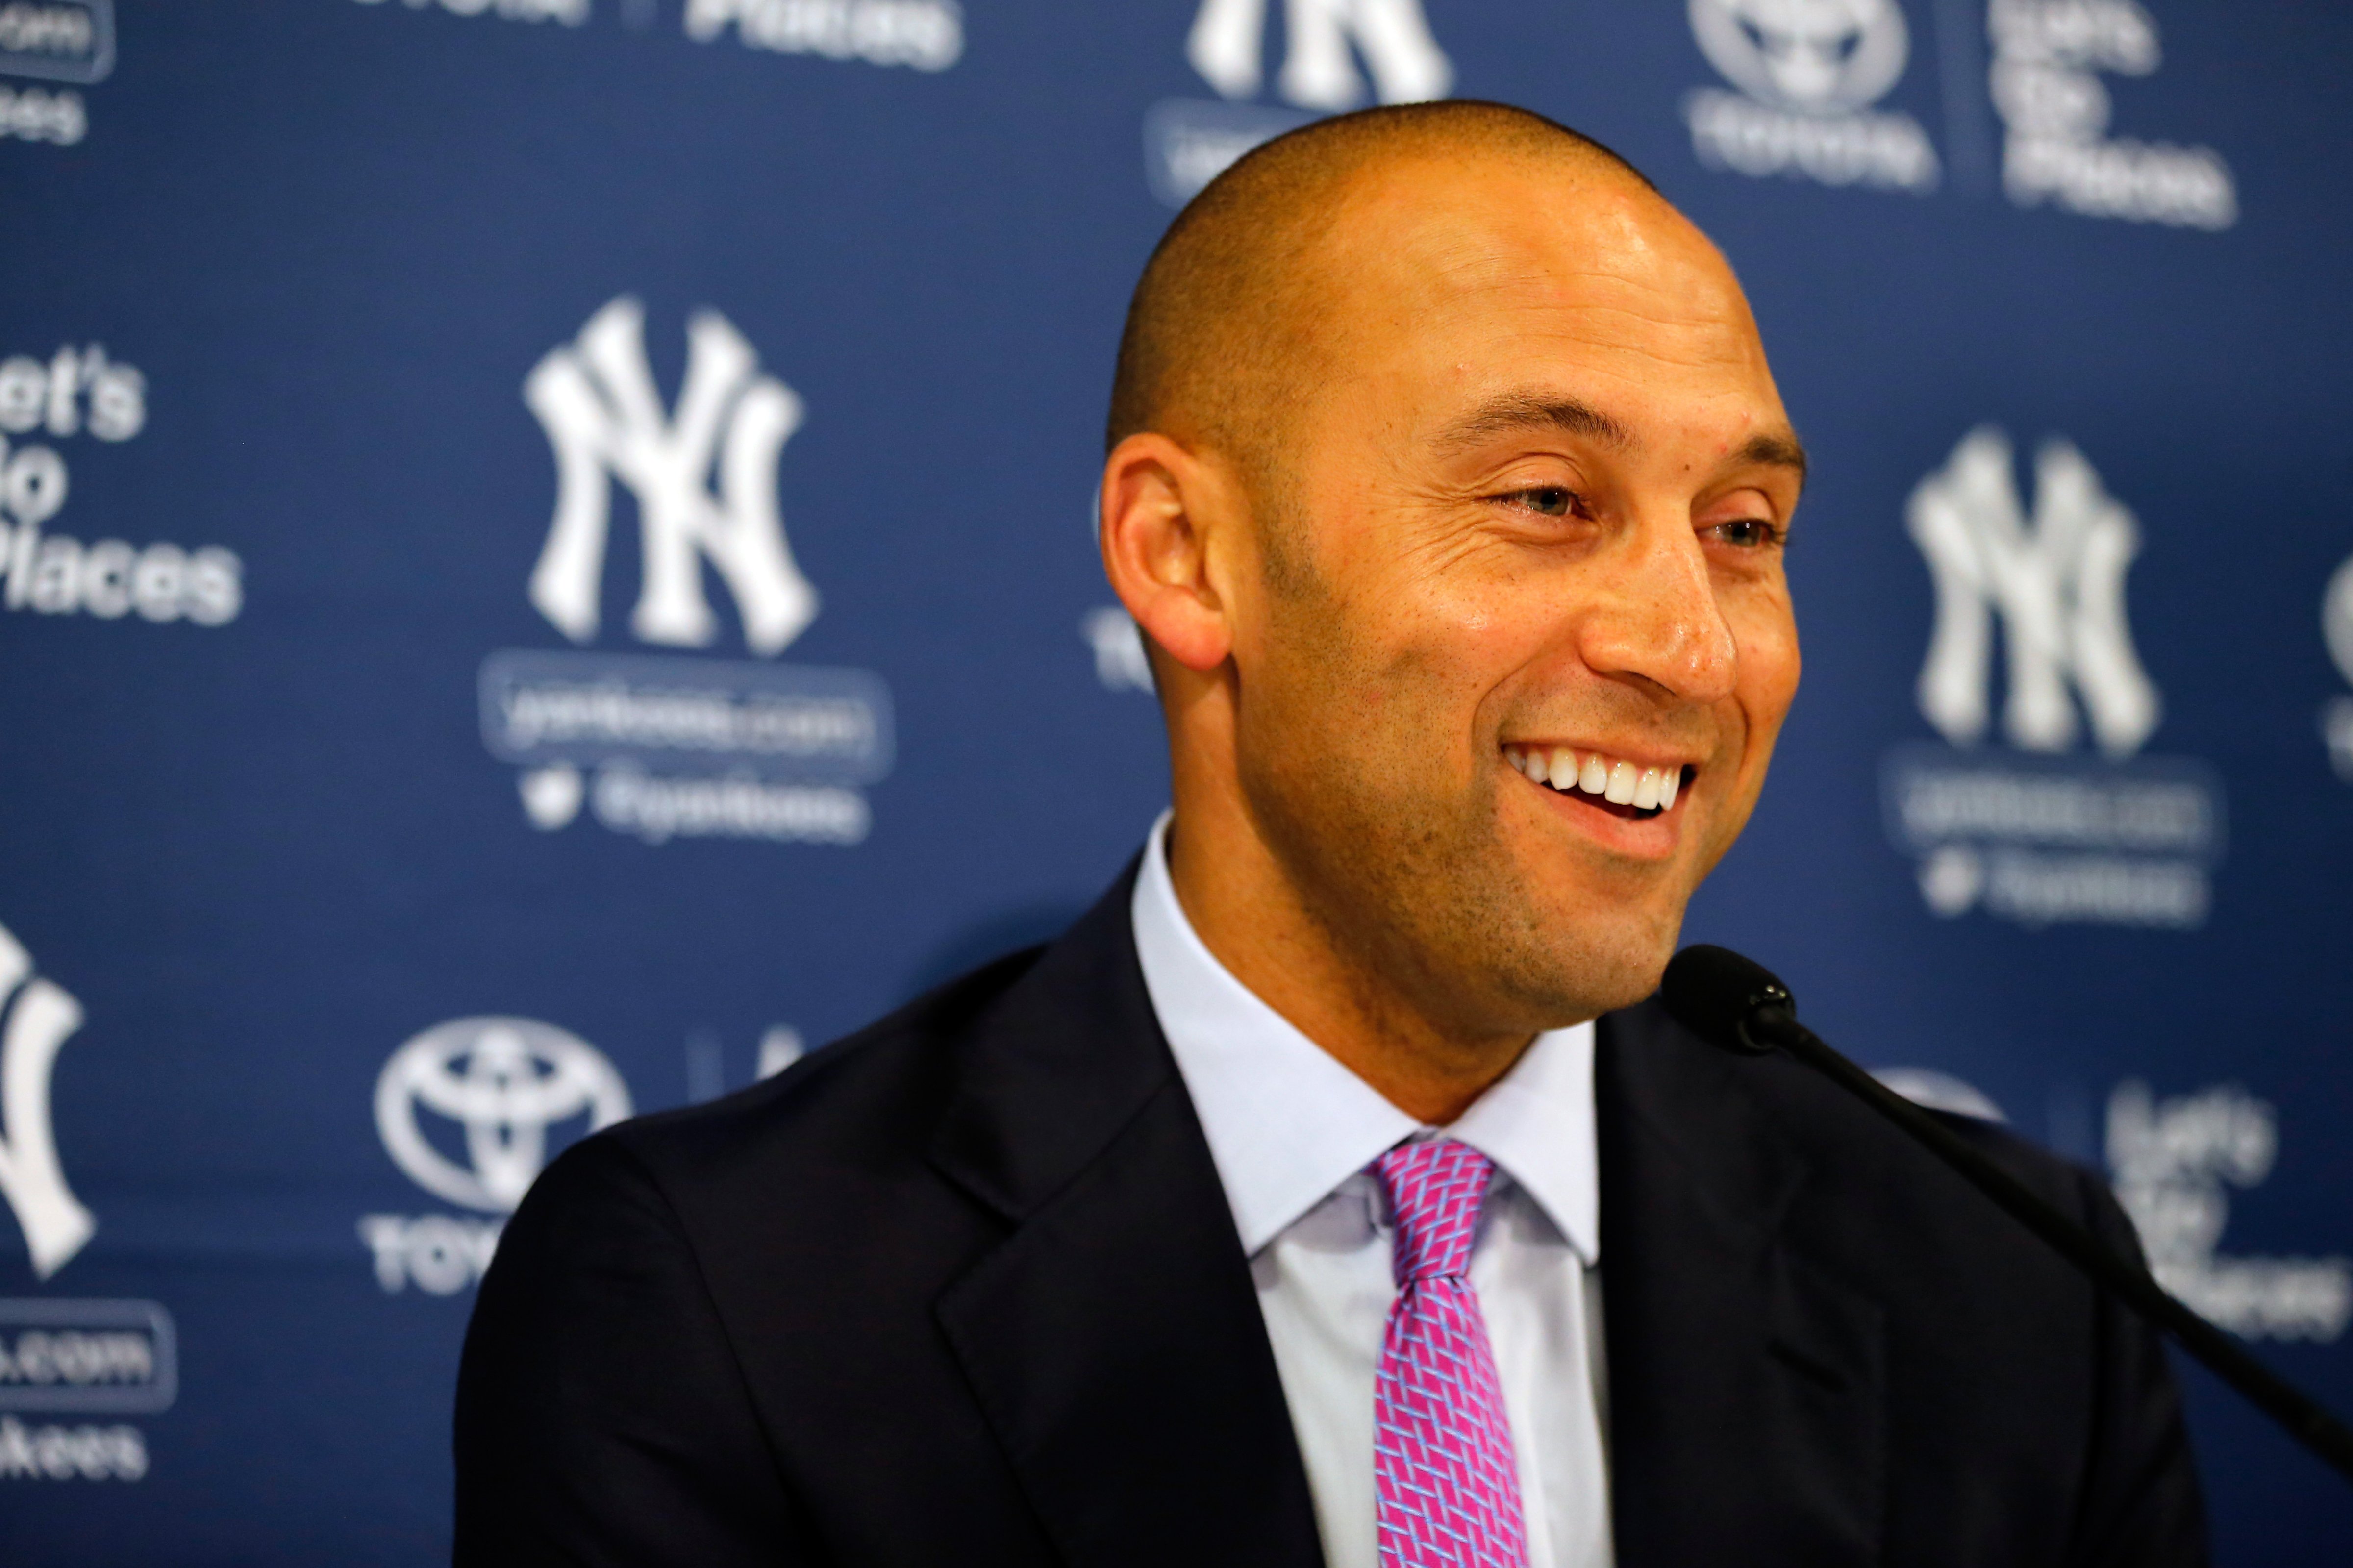 Derek Jeter speaks to the media following his last career game against the Boston Red Sox at Fenway Park on September 28, 2014 in Boston. (Jim Rogash&mdash;Getty Images)